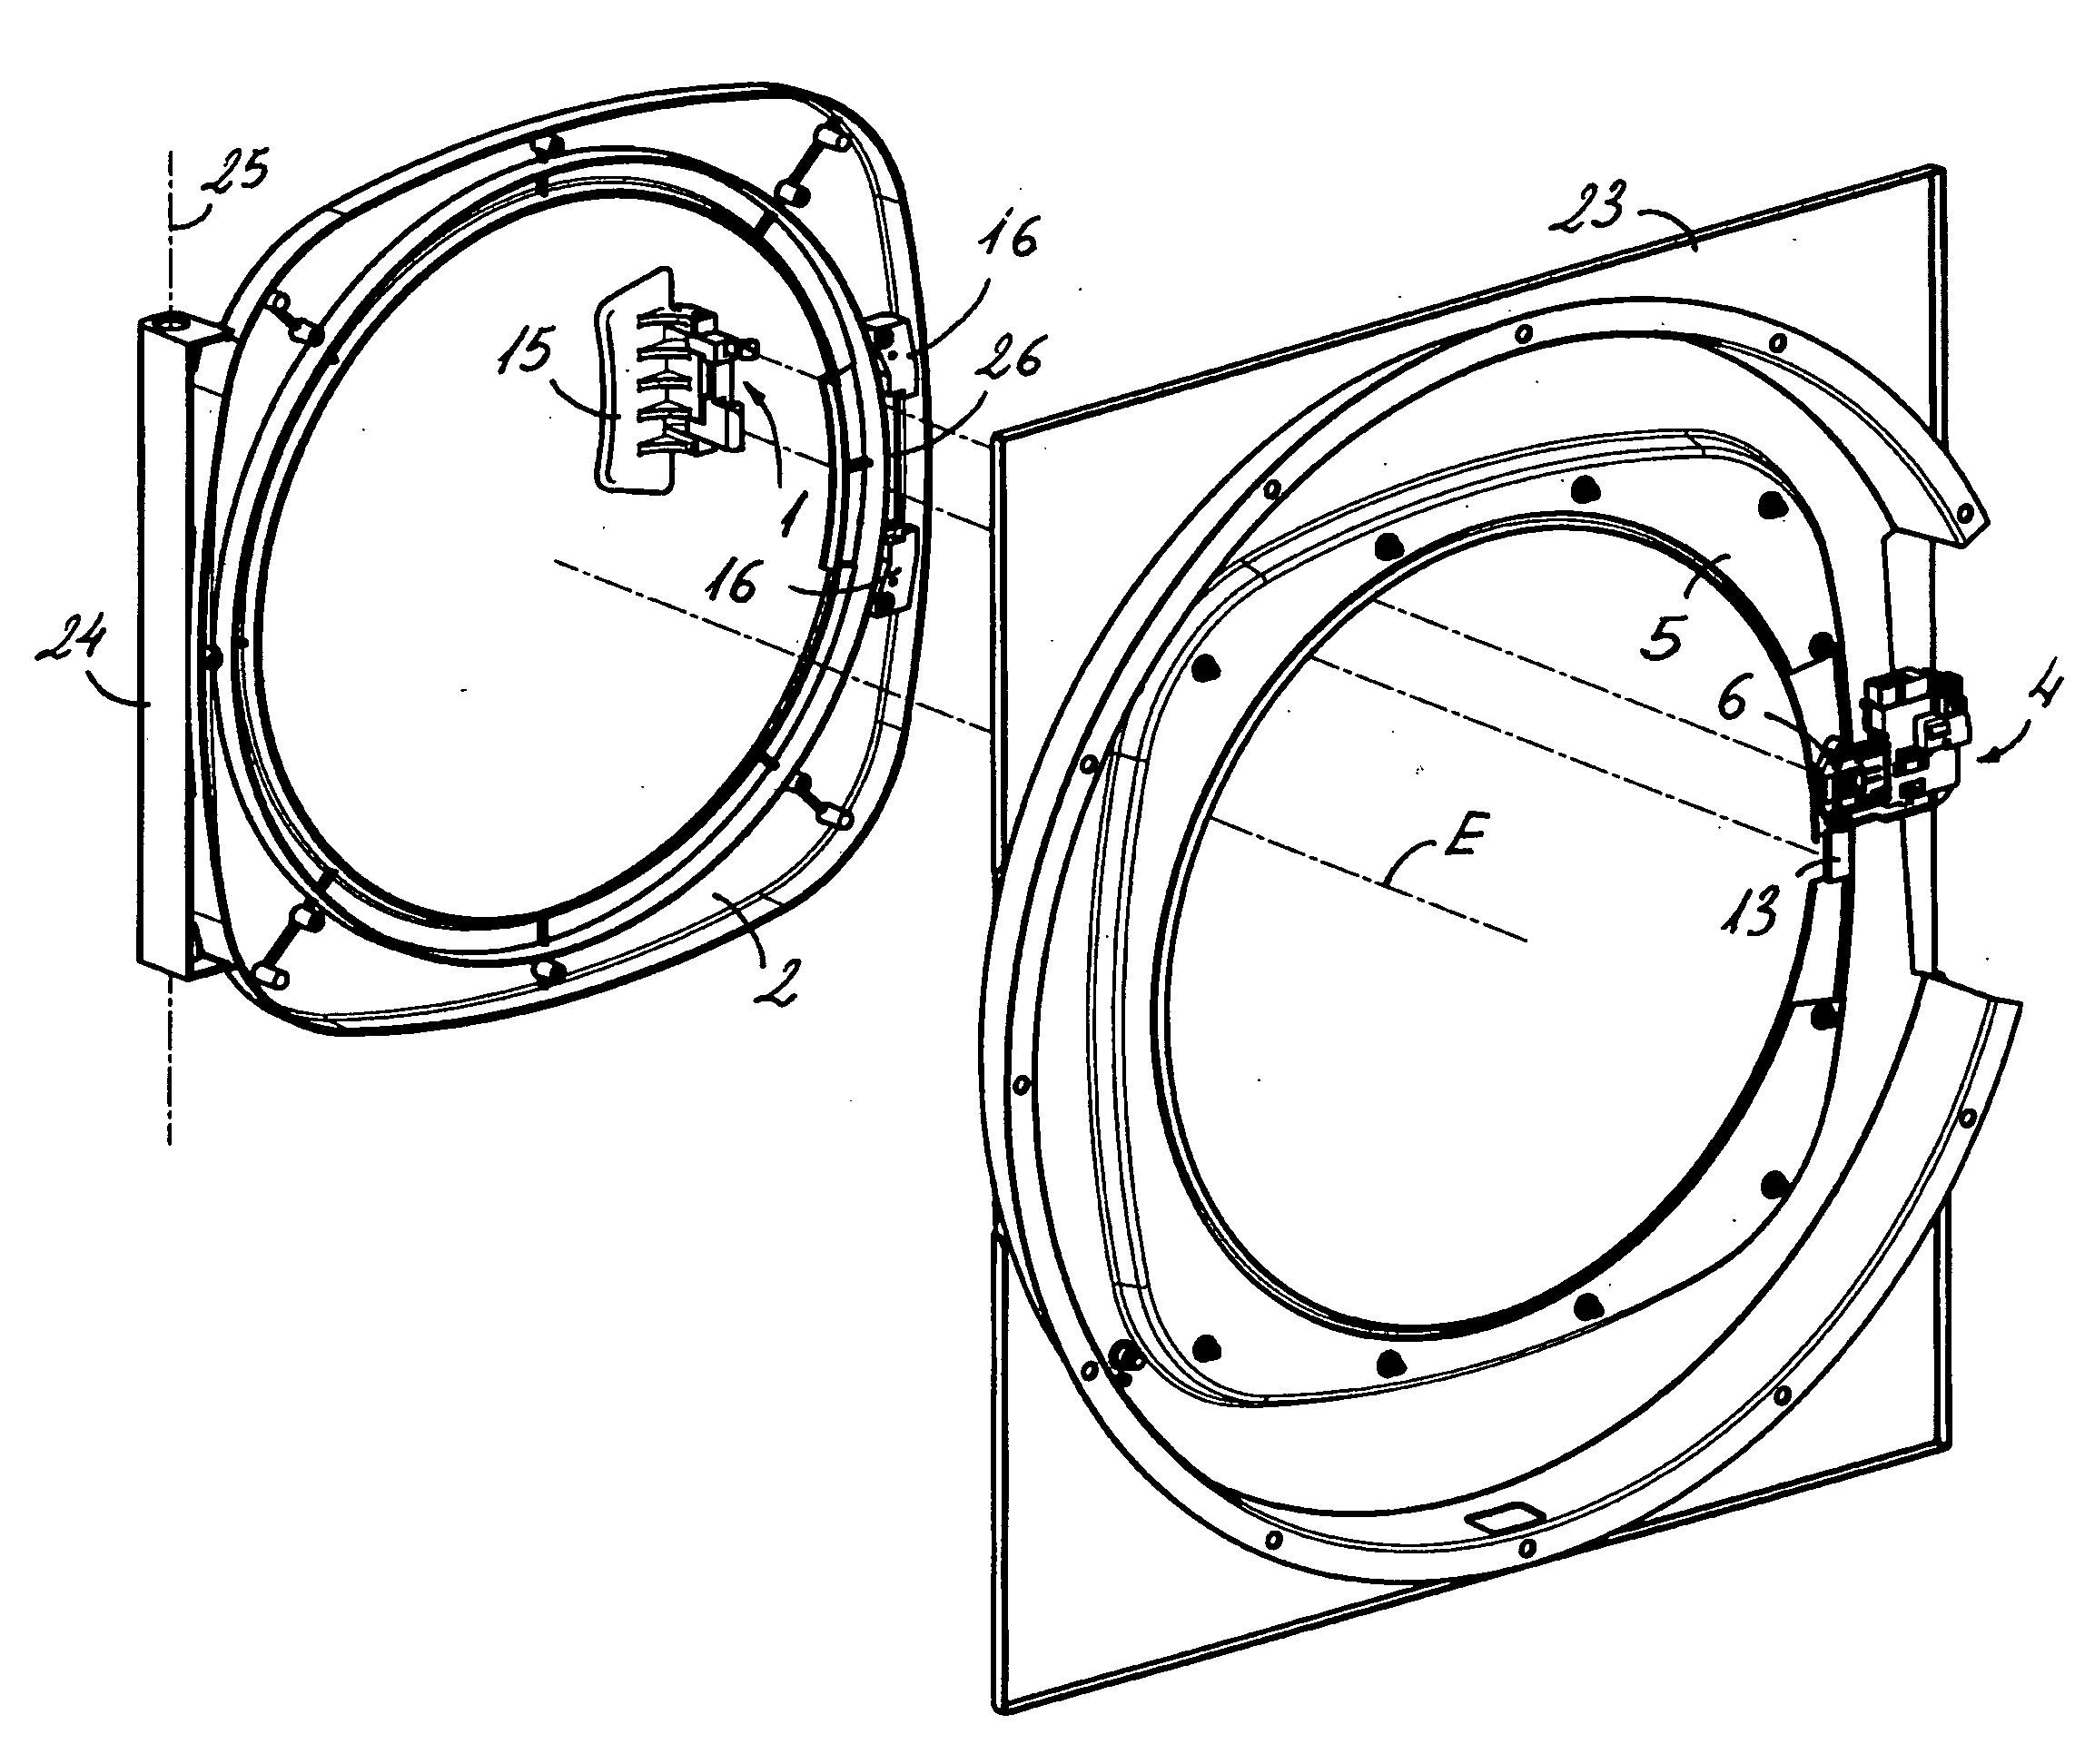 Locking device for the door of an apparatus comprising a rotary drum, and a latch for such device